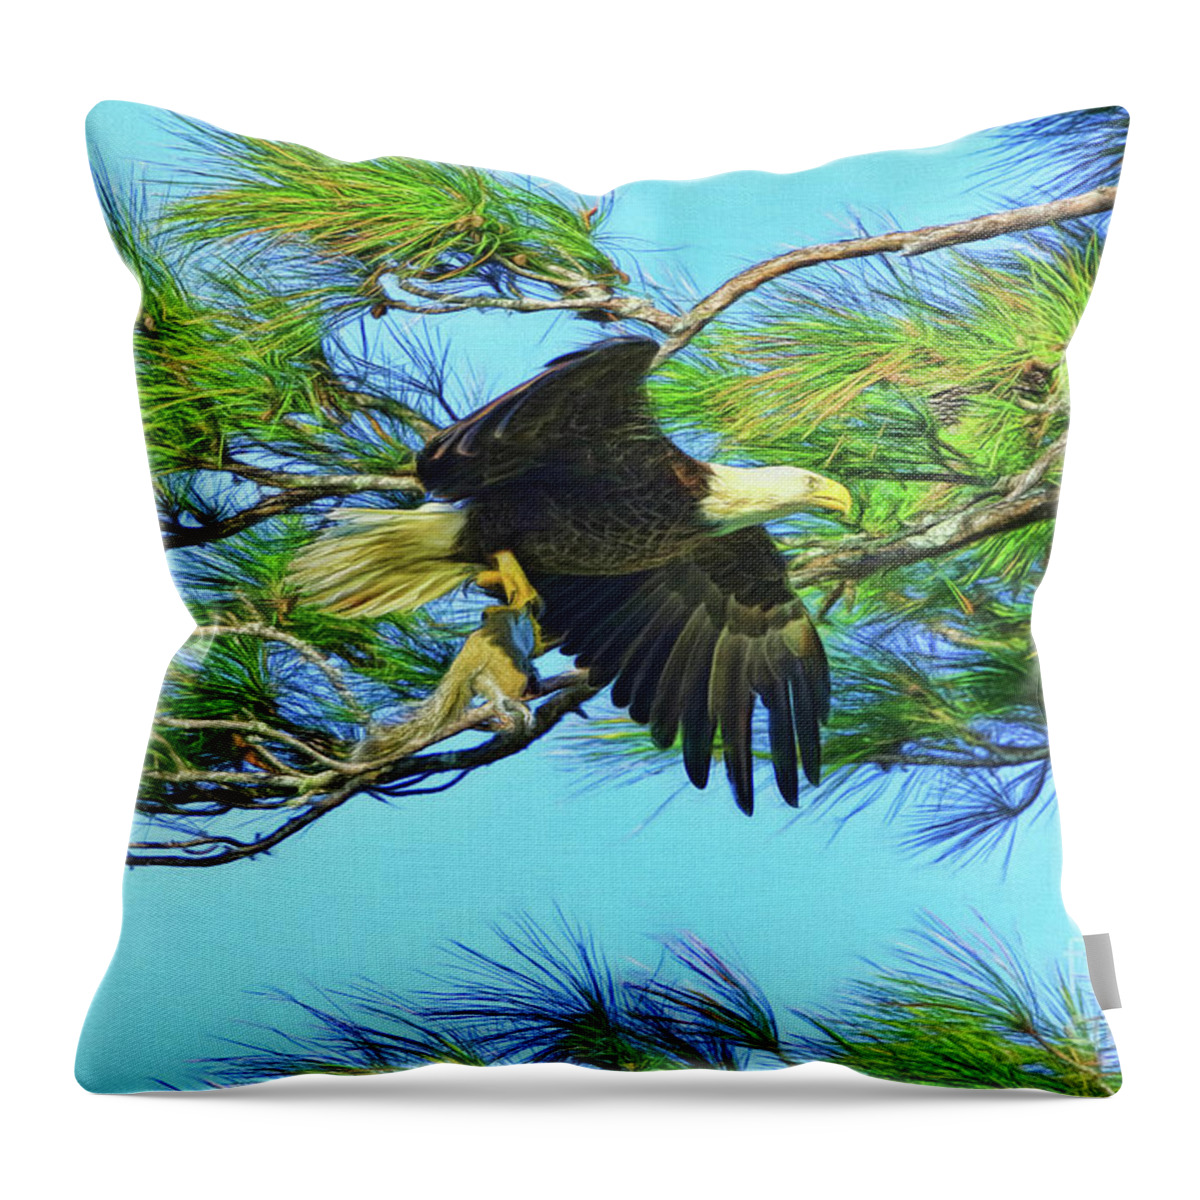 Eagle Throw Pillow featuring the painting Eagle Series Food by Deborah Benoit